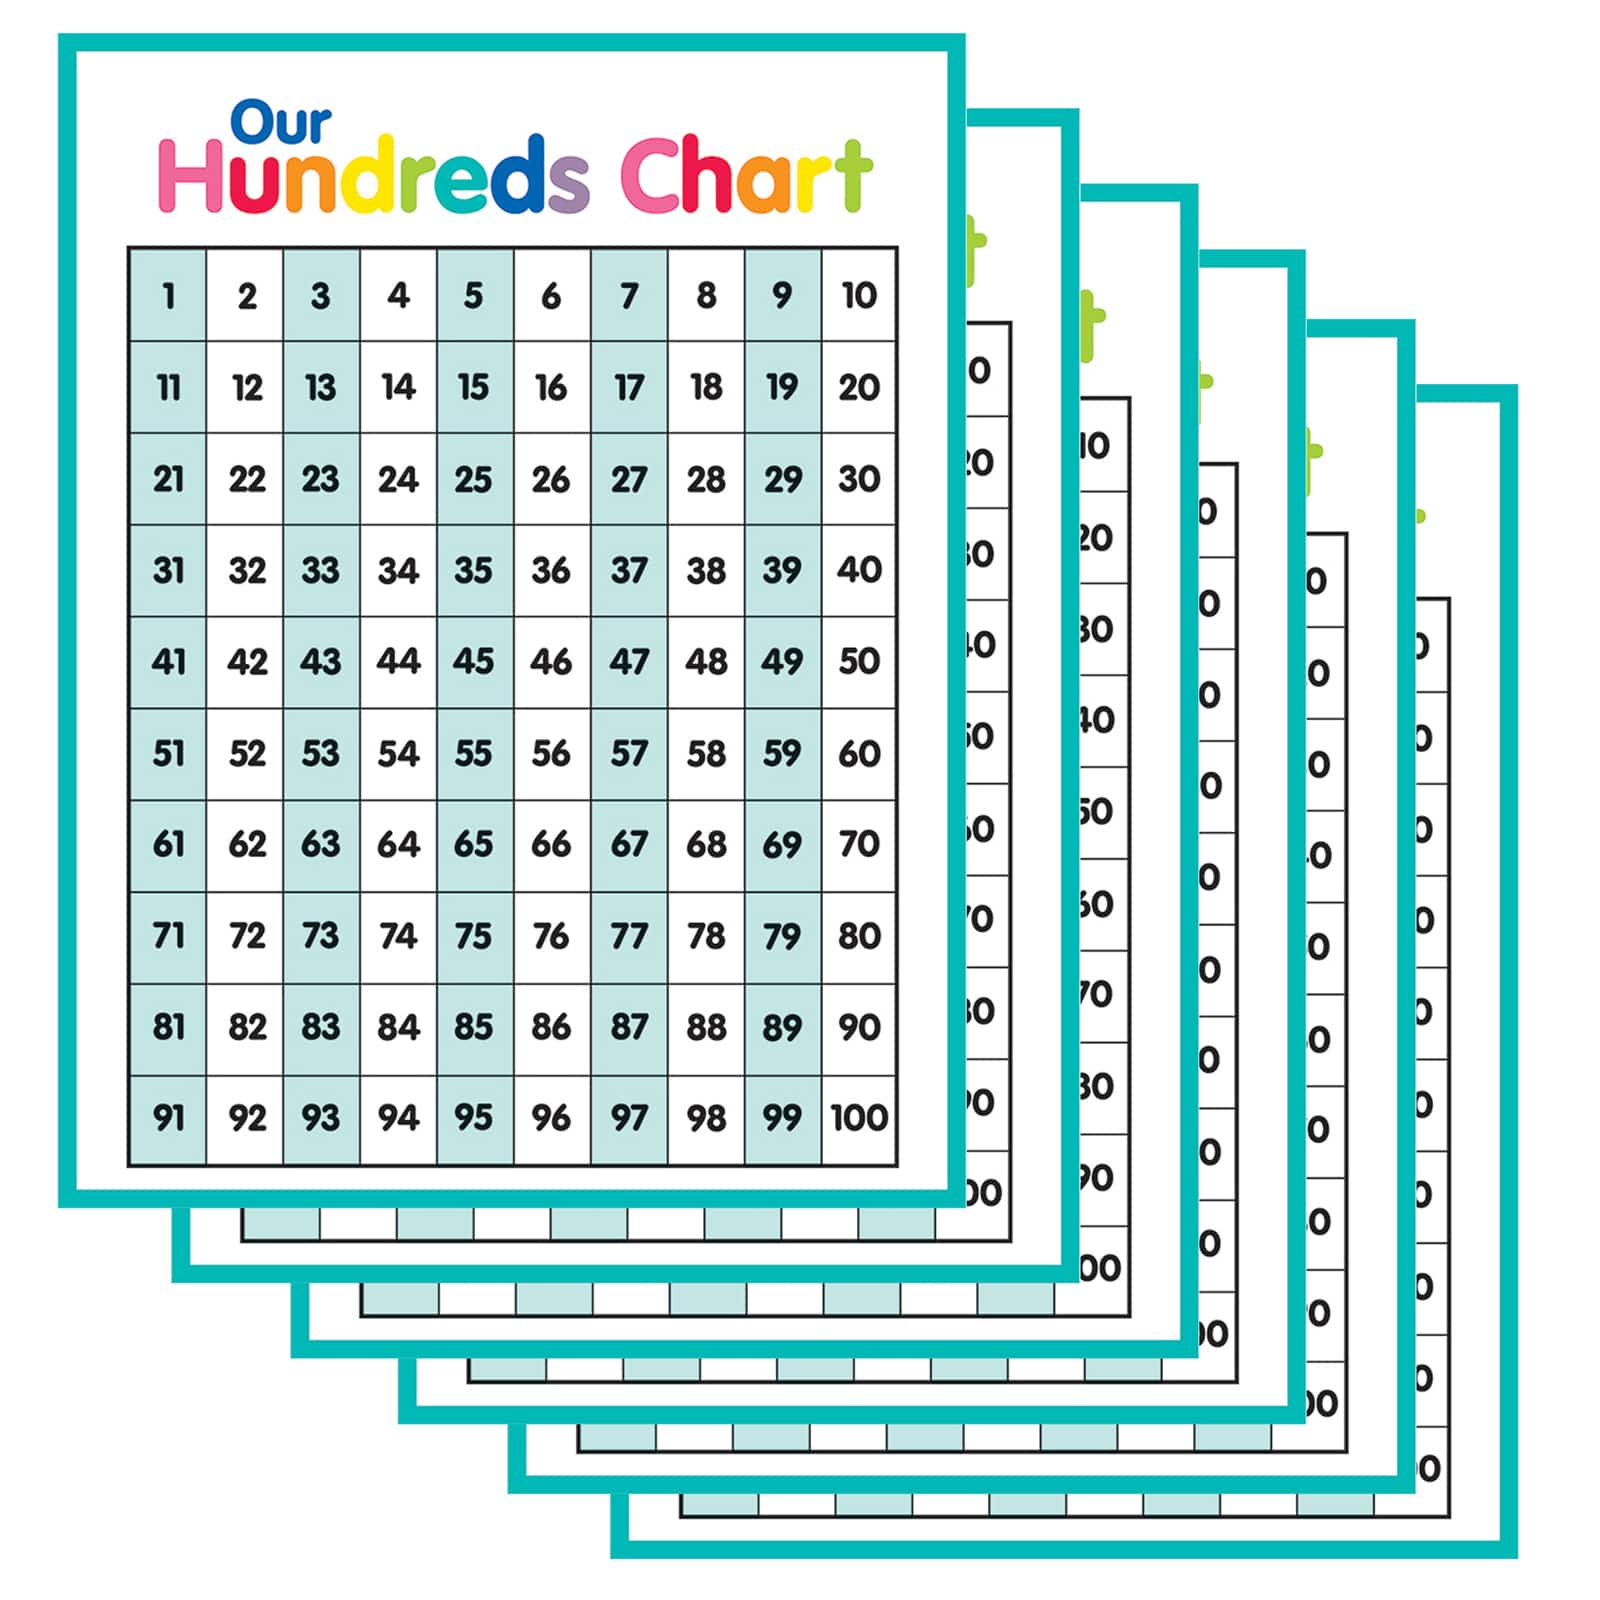 Count By 4 Chart